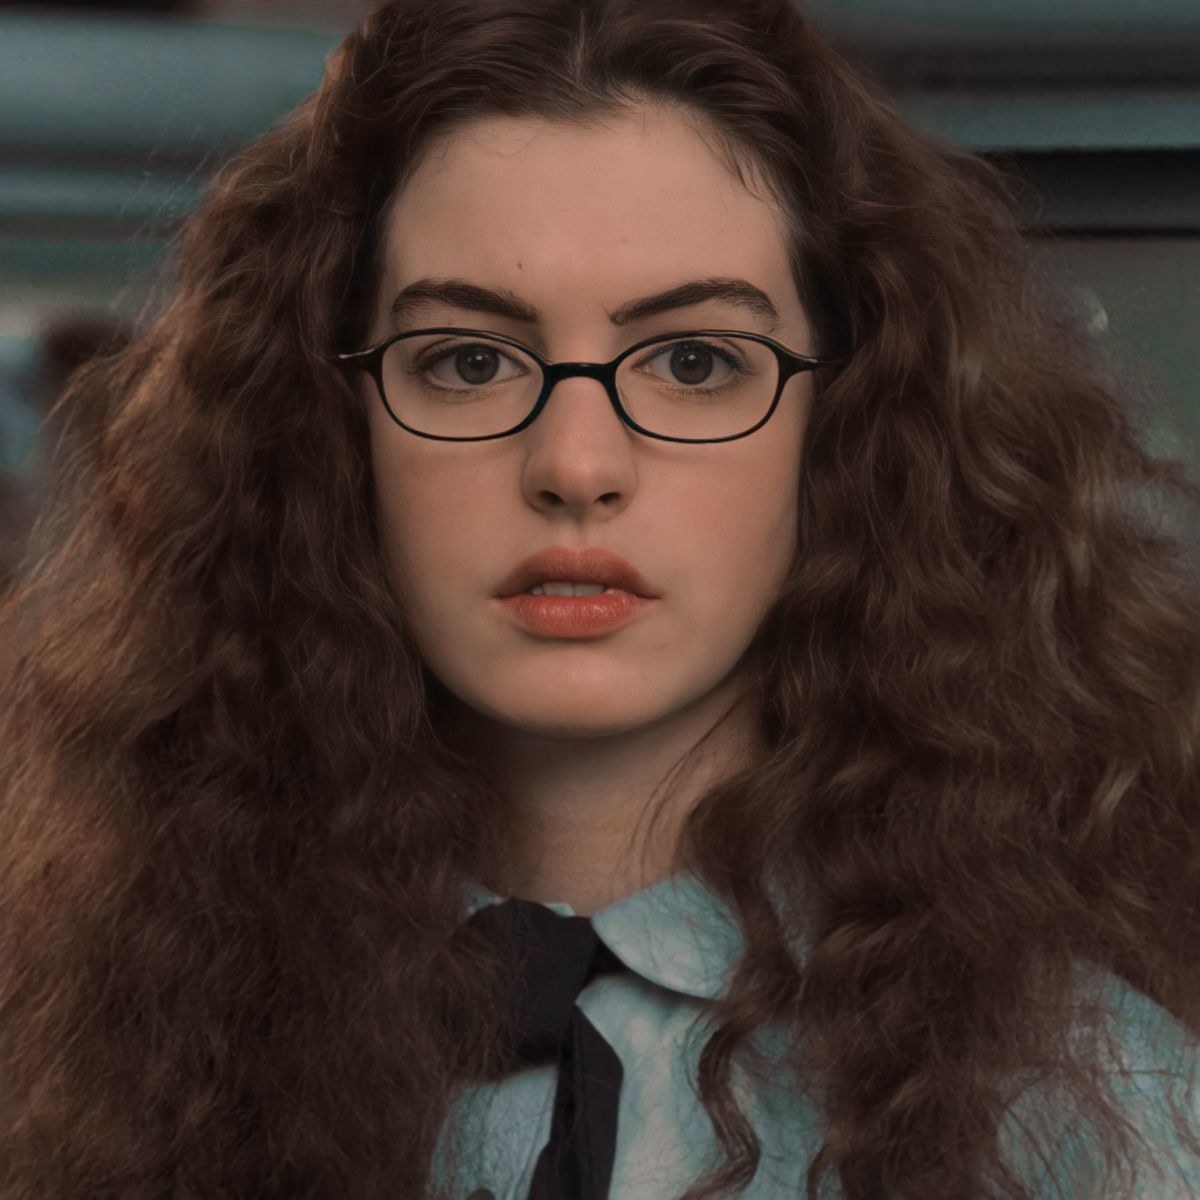 anne hathaway is shown in character as mia thermopolis from the princess diaries movie